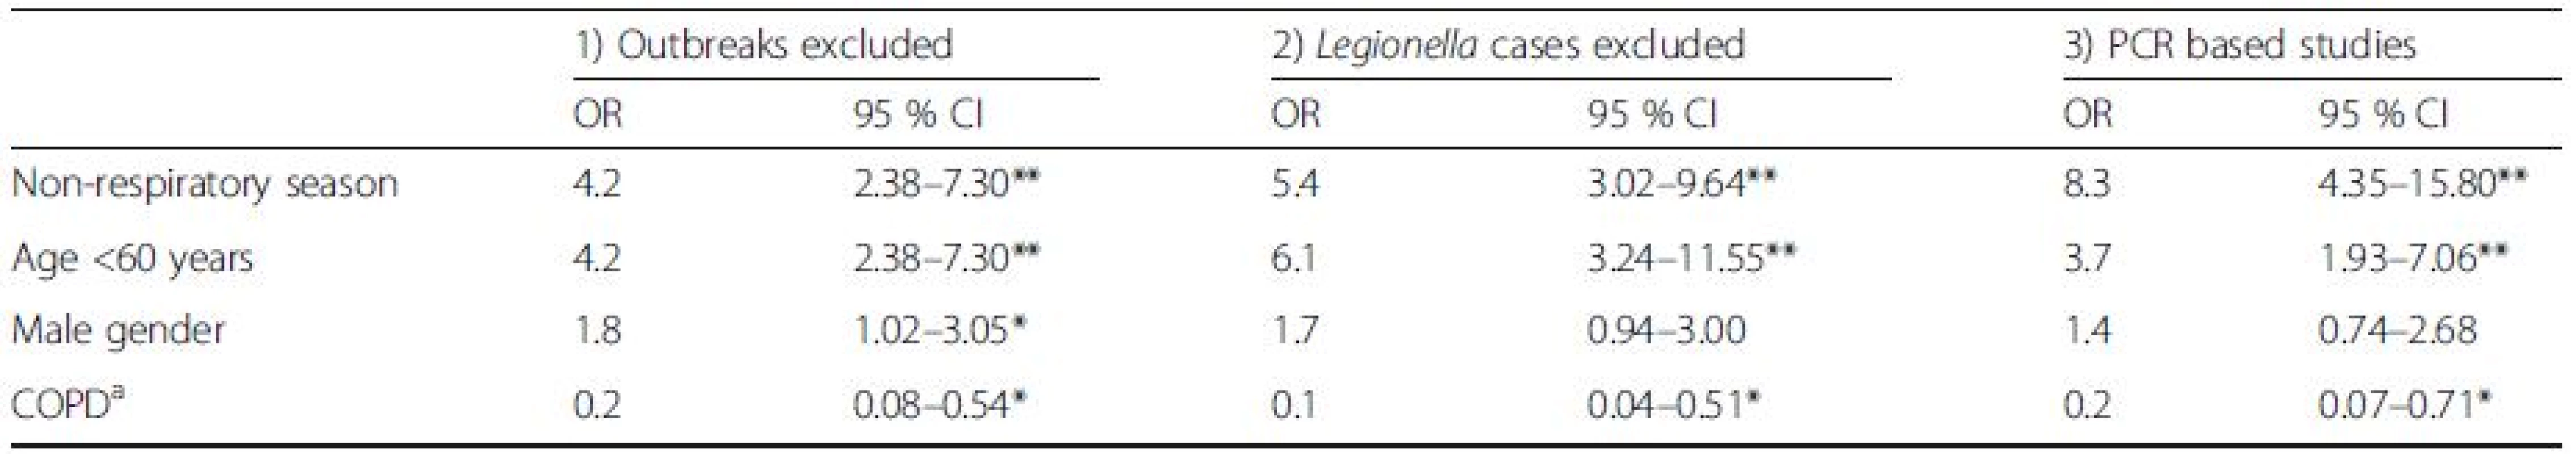 Two multivariable logistic regression sensitivity analyses with: 1) Outbreaks excluded; 2) All <i>Legionella</i> cases excluded; 3) Only two studies that used PCR methods